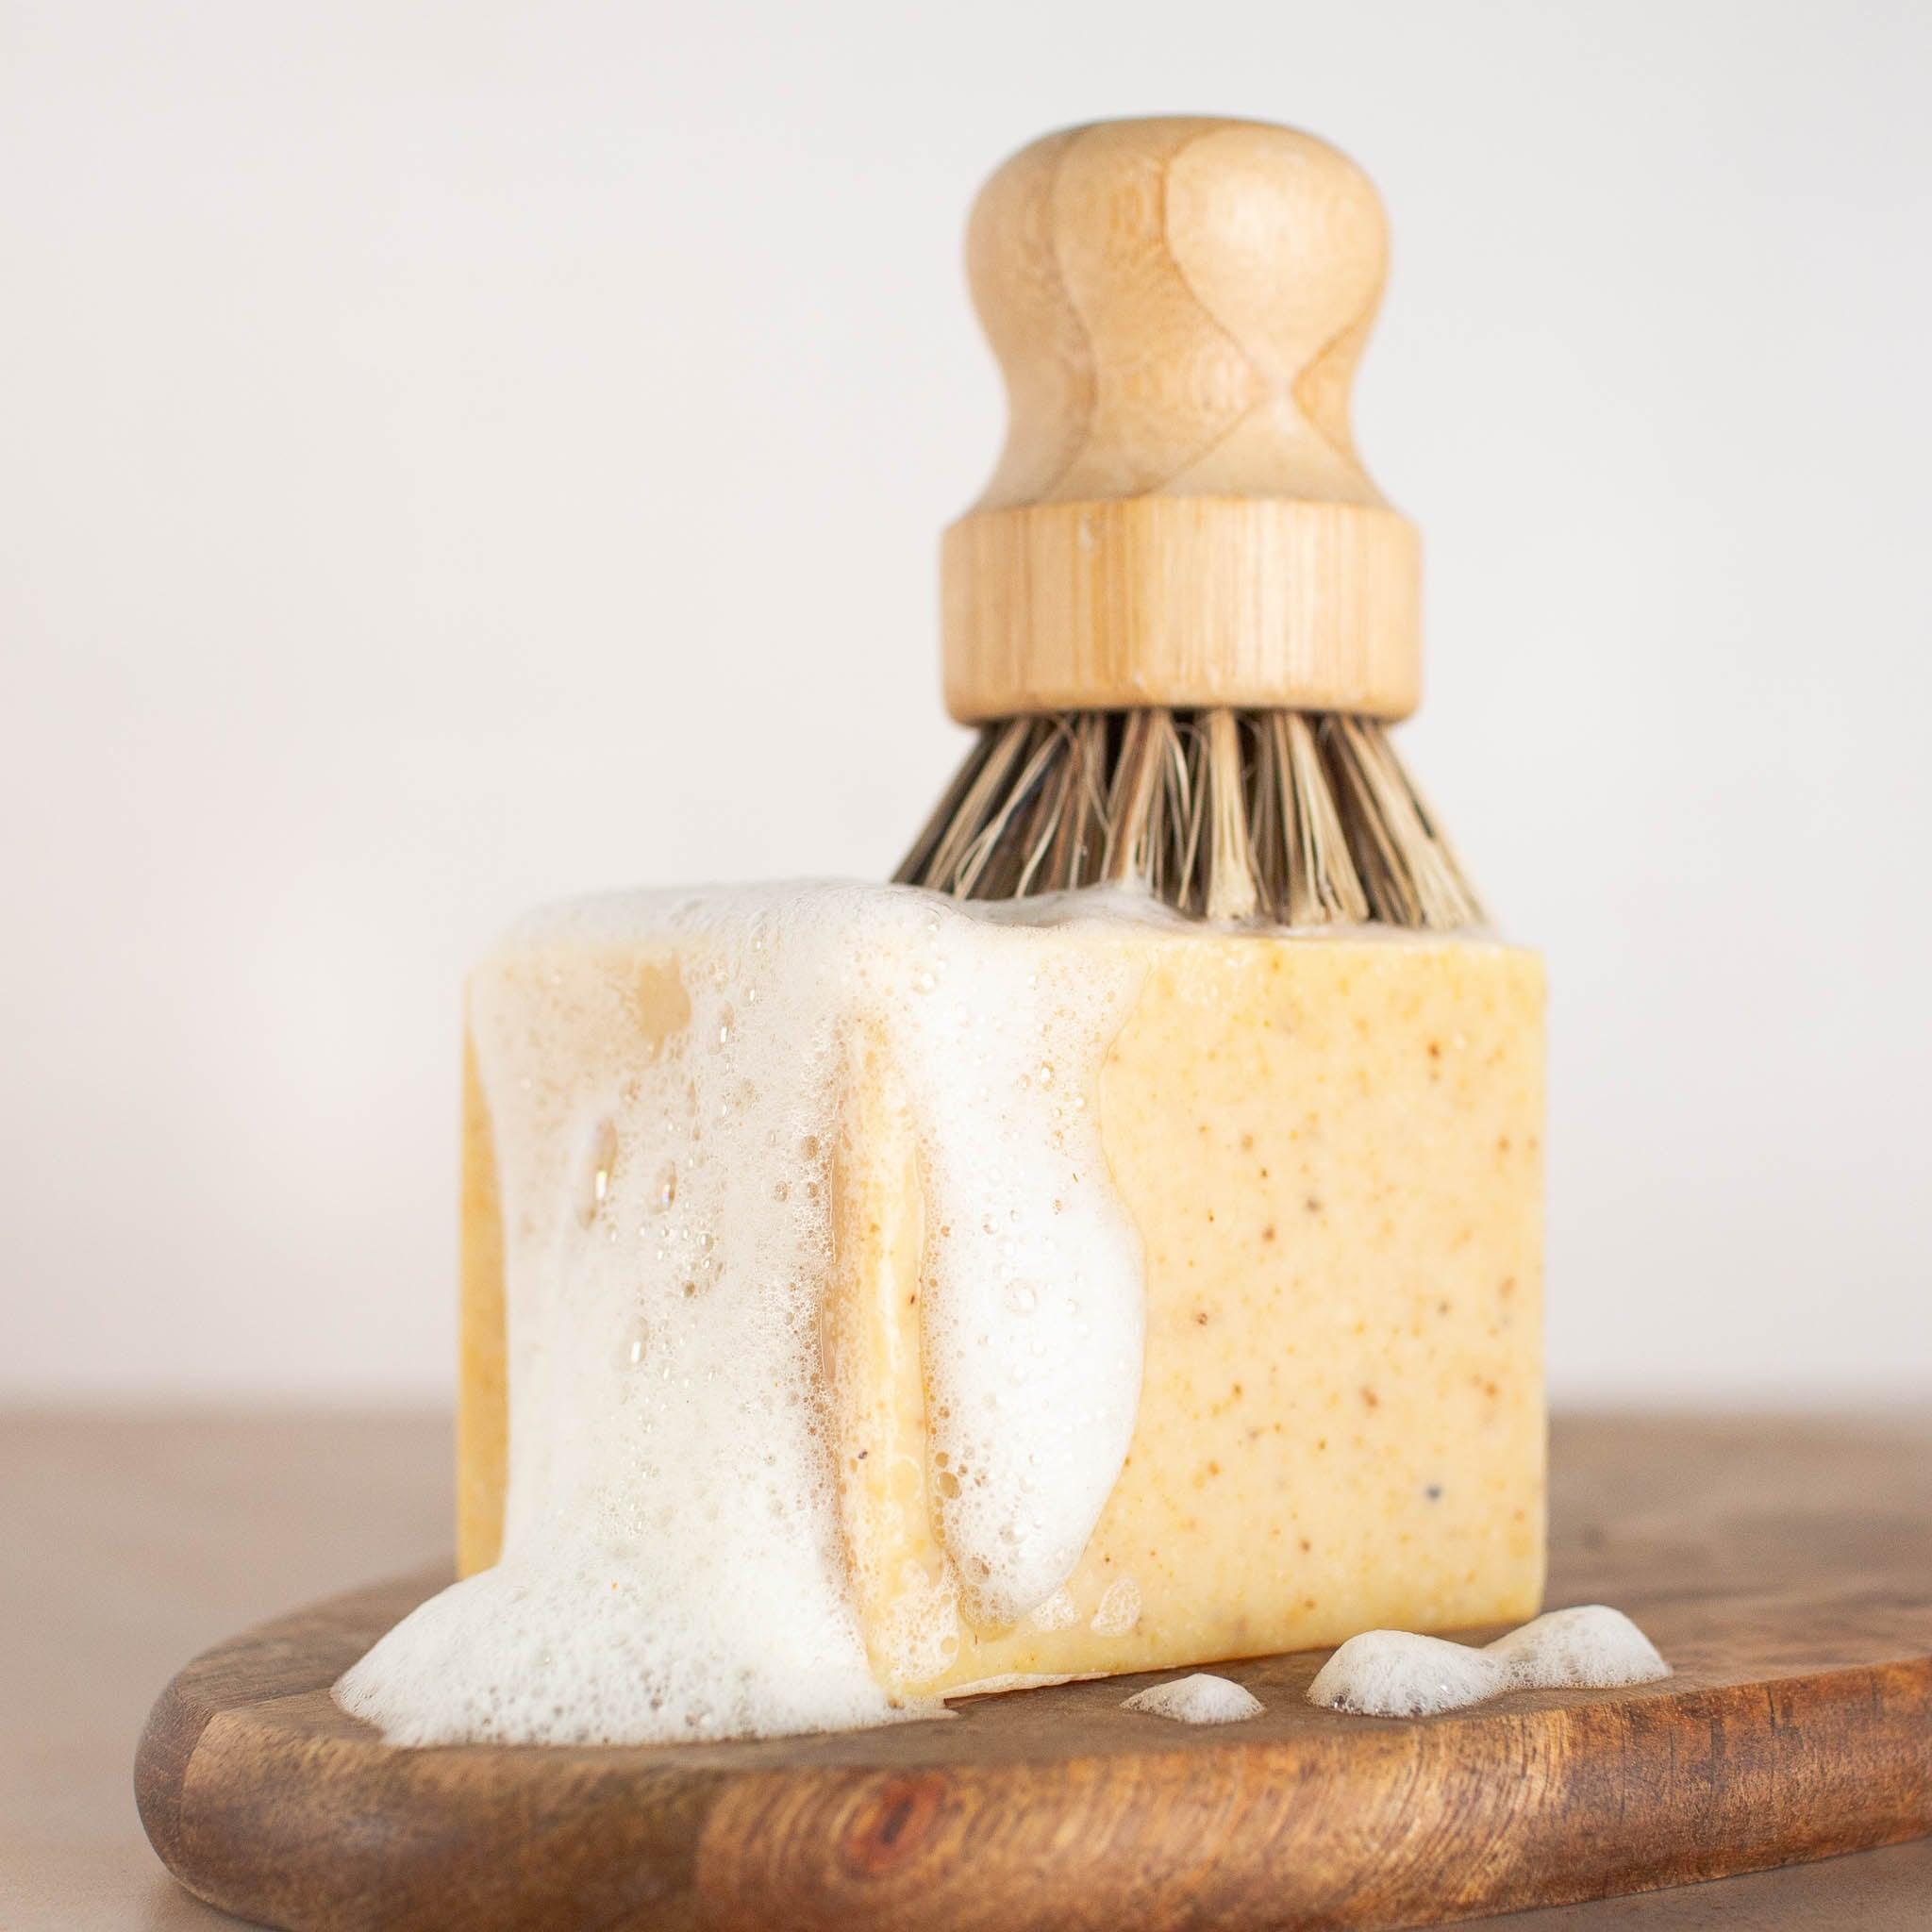 Lathered up pale orange speckled block of vegan Citrus Solid Dish Soap, with dish brush.